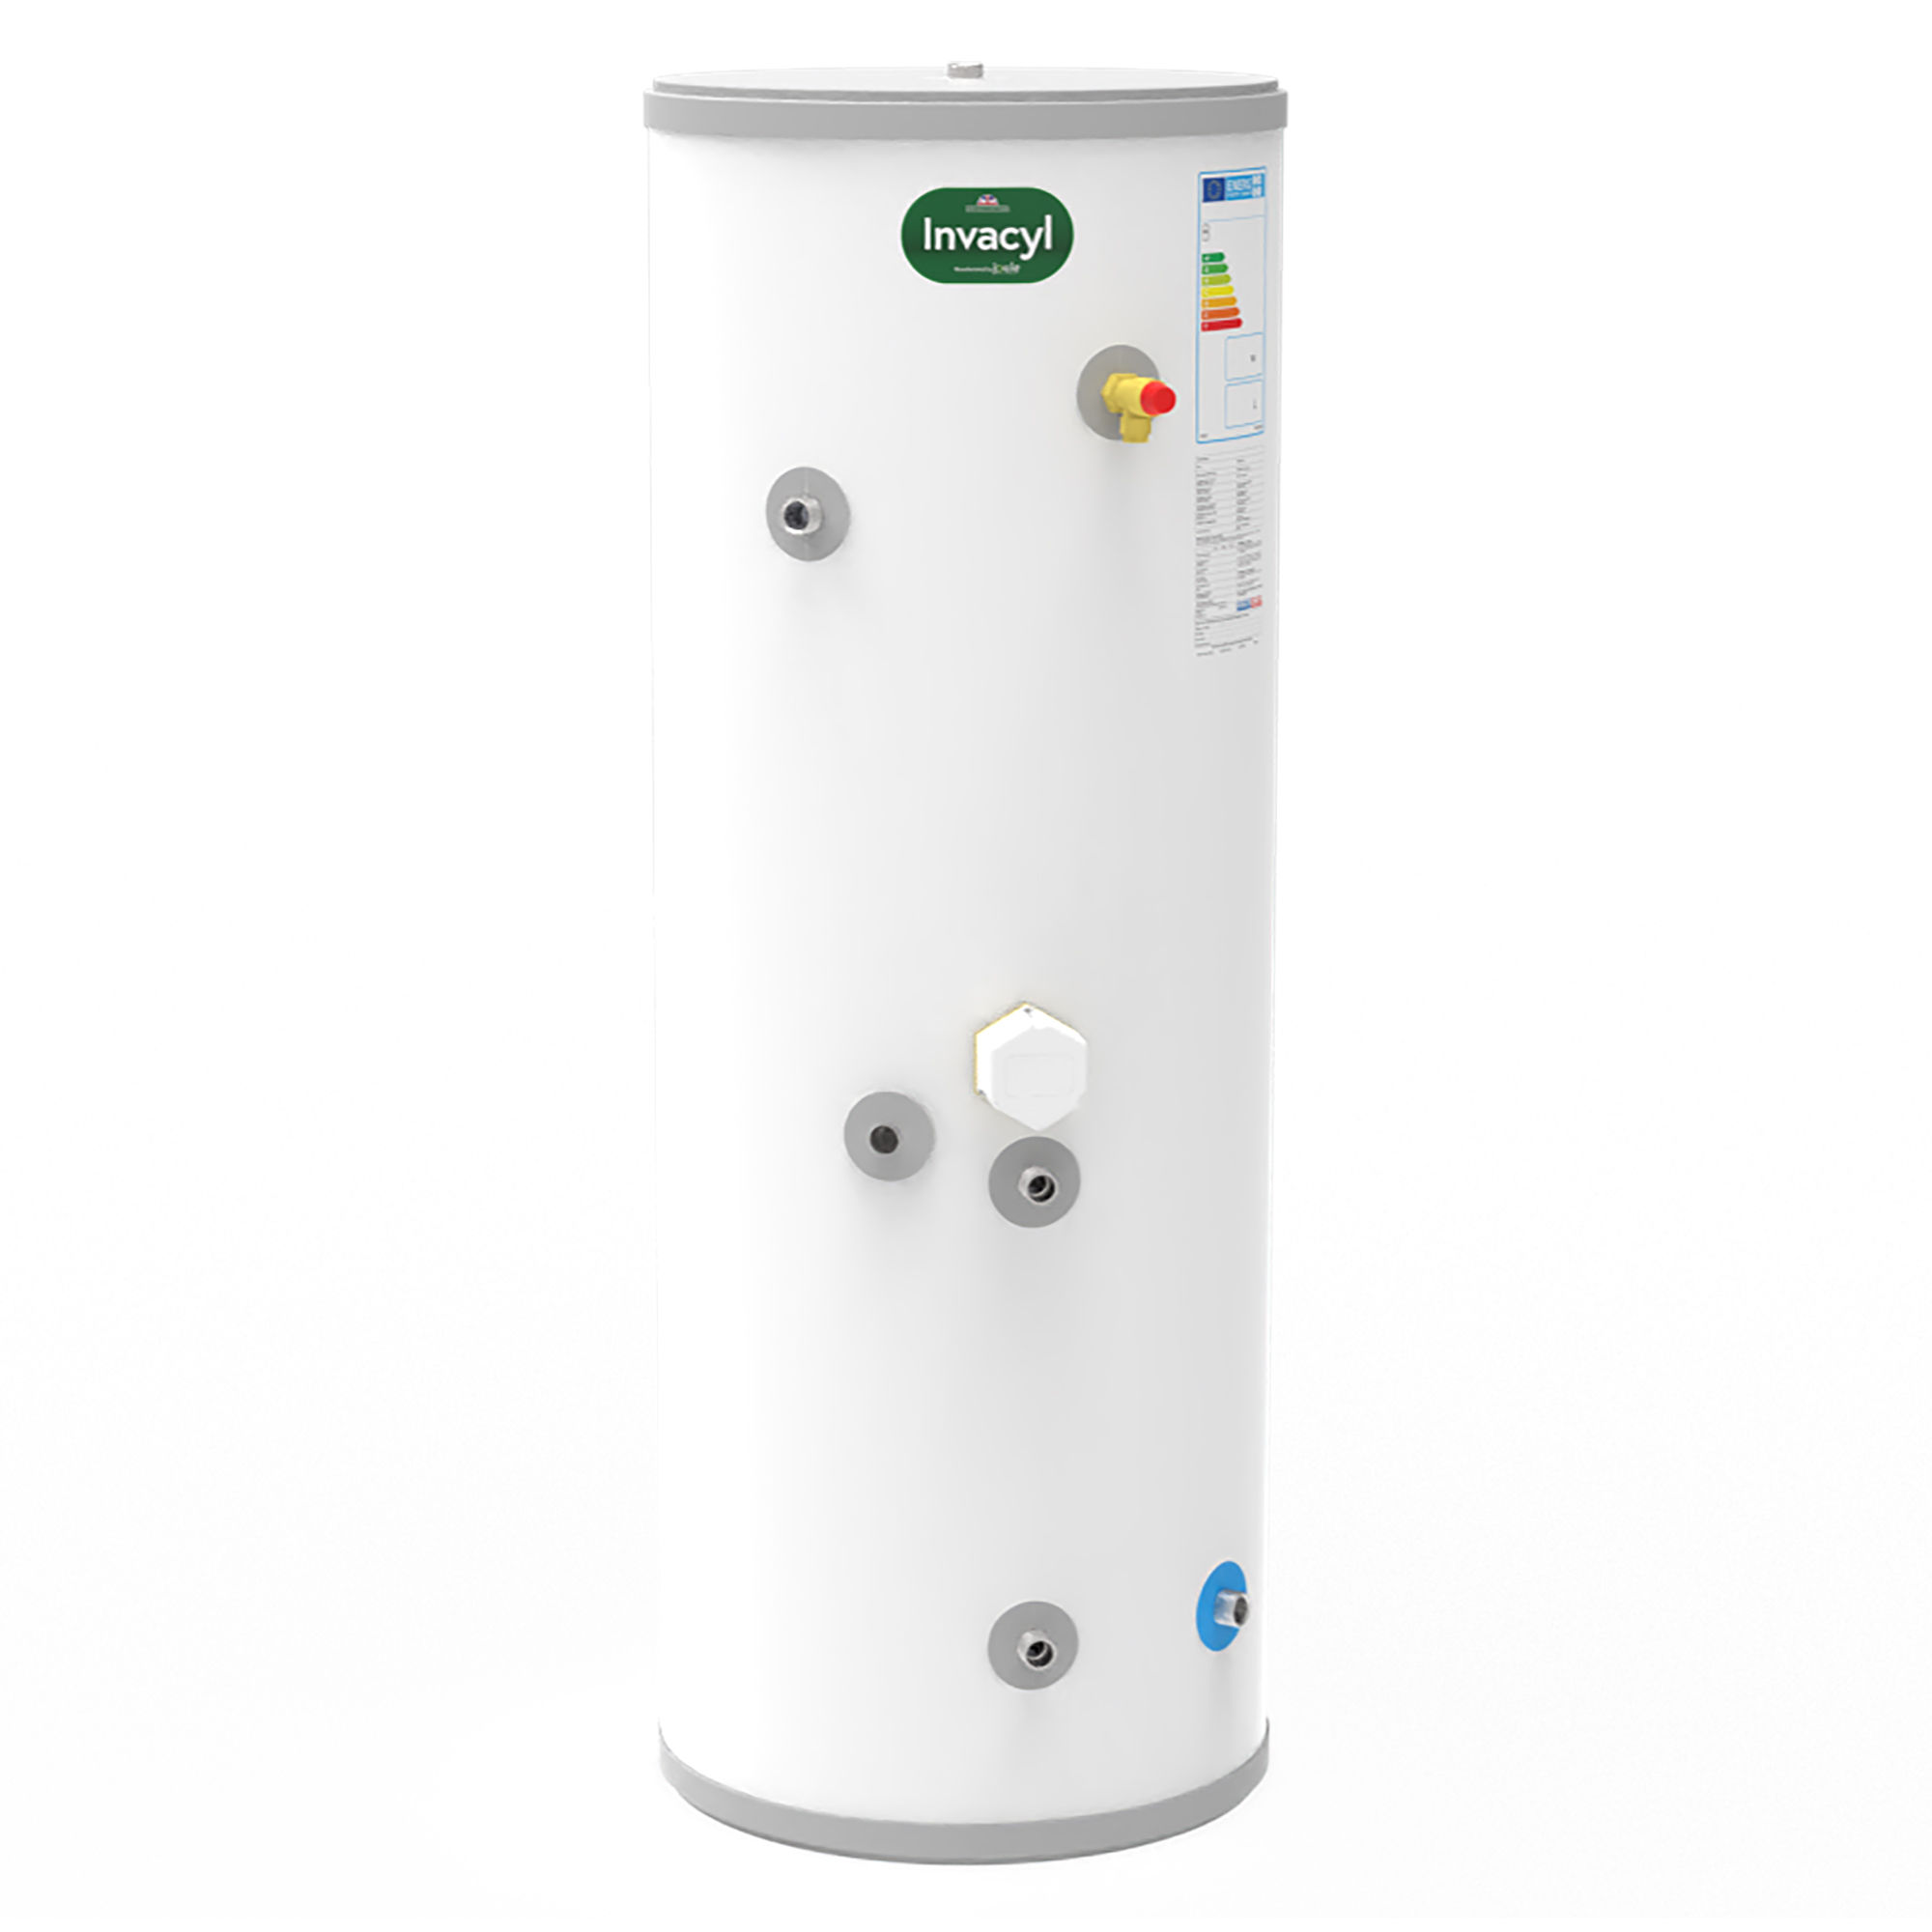 Joule Invacyl Unvented Indirect Standard Hot Water Cylinder 180L - TRBMVI-0180LFB